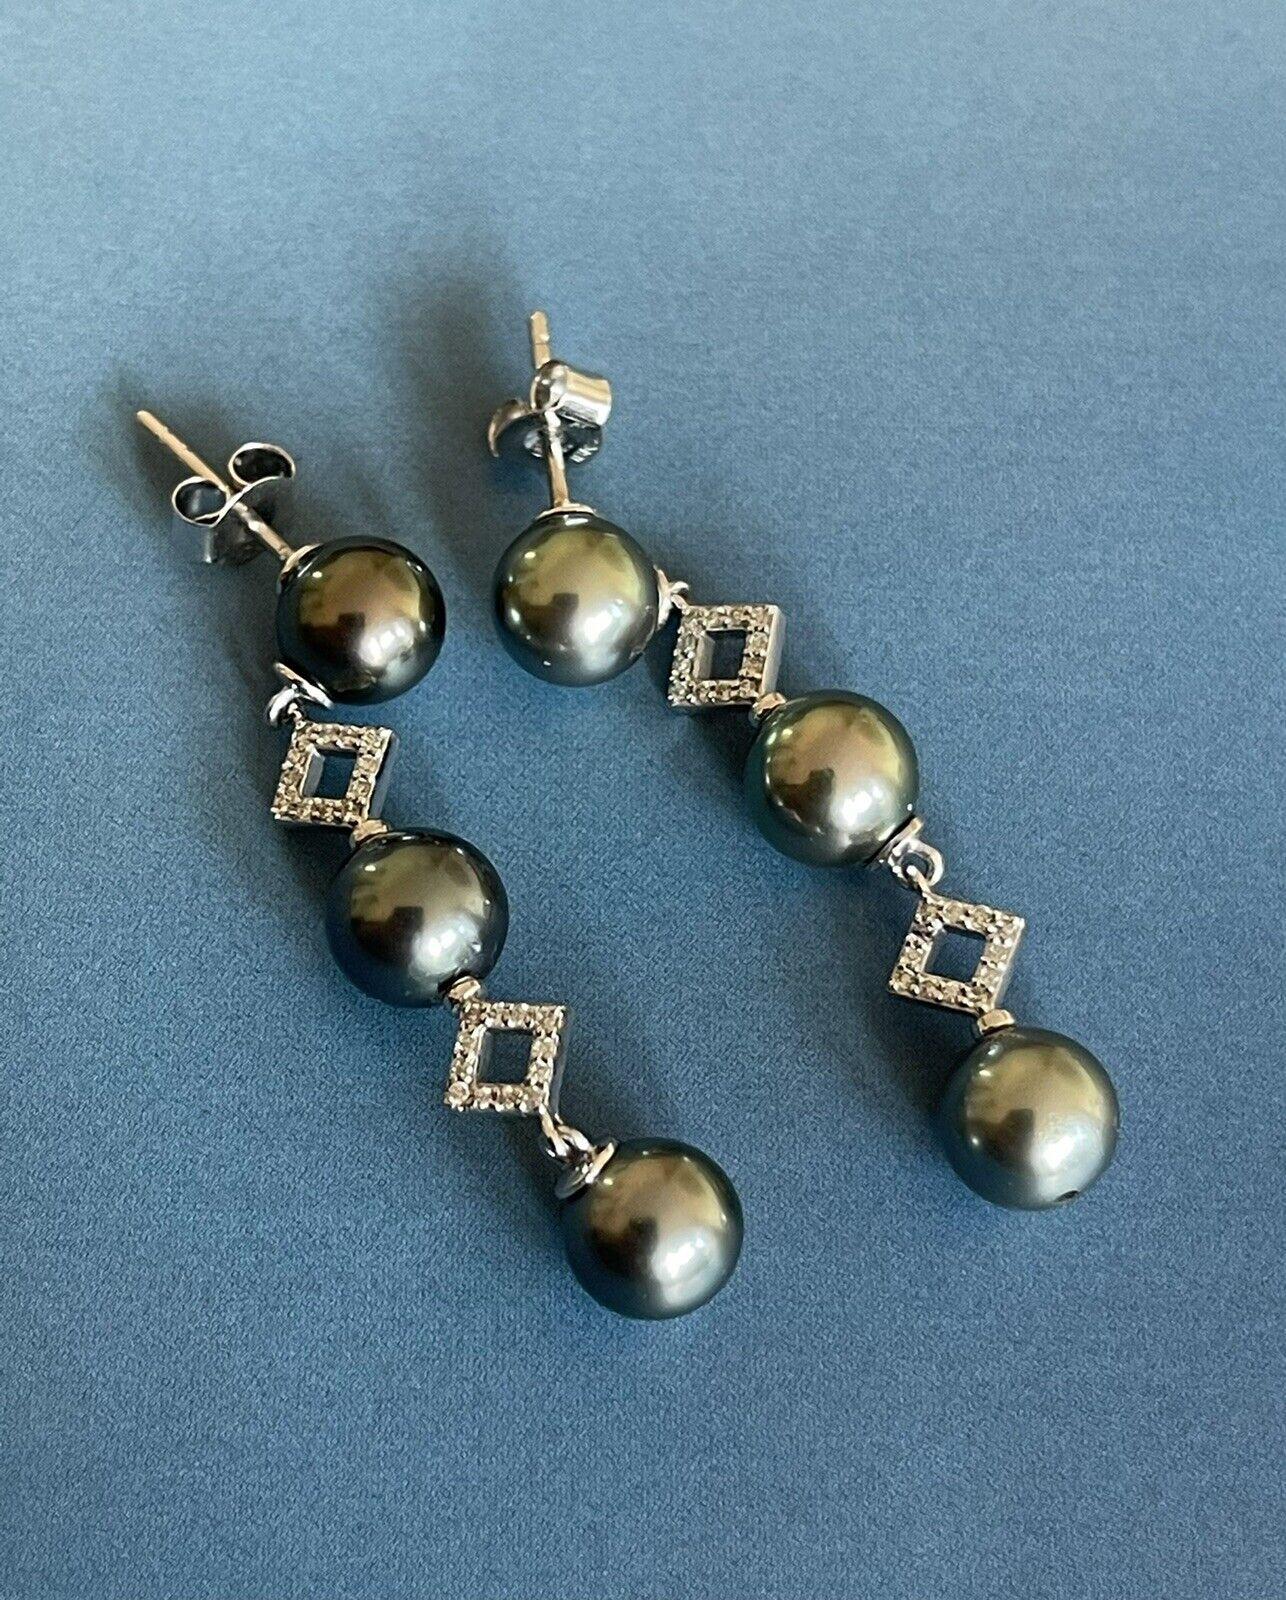 18ct White Gold Diamond Earrings With Peacock Pearl Drops 0.40ct Cocktail Studs For Sale 1